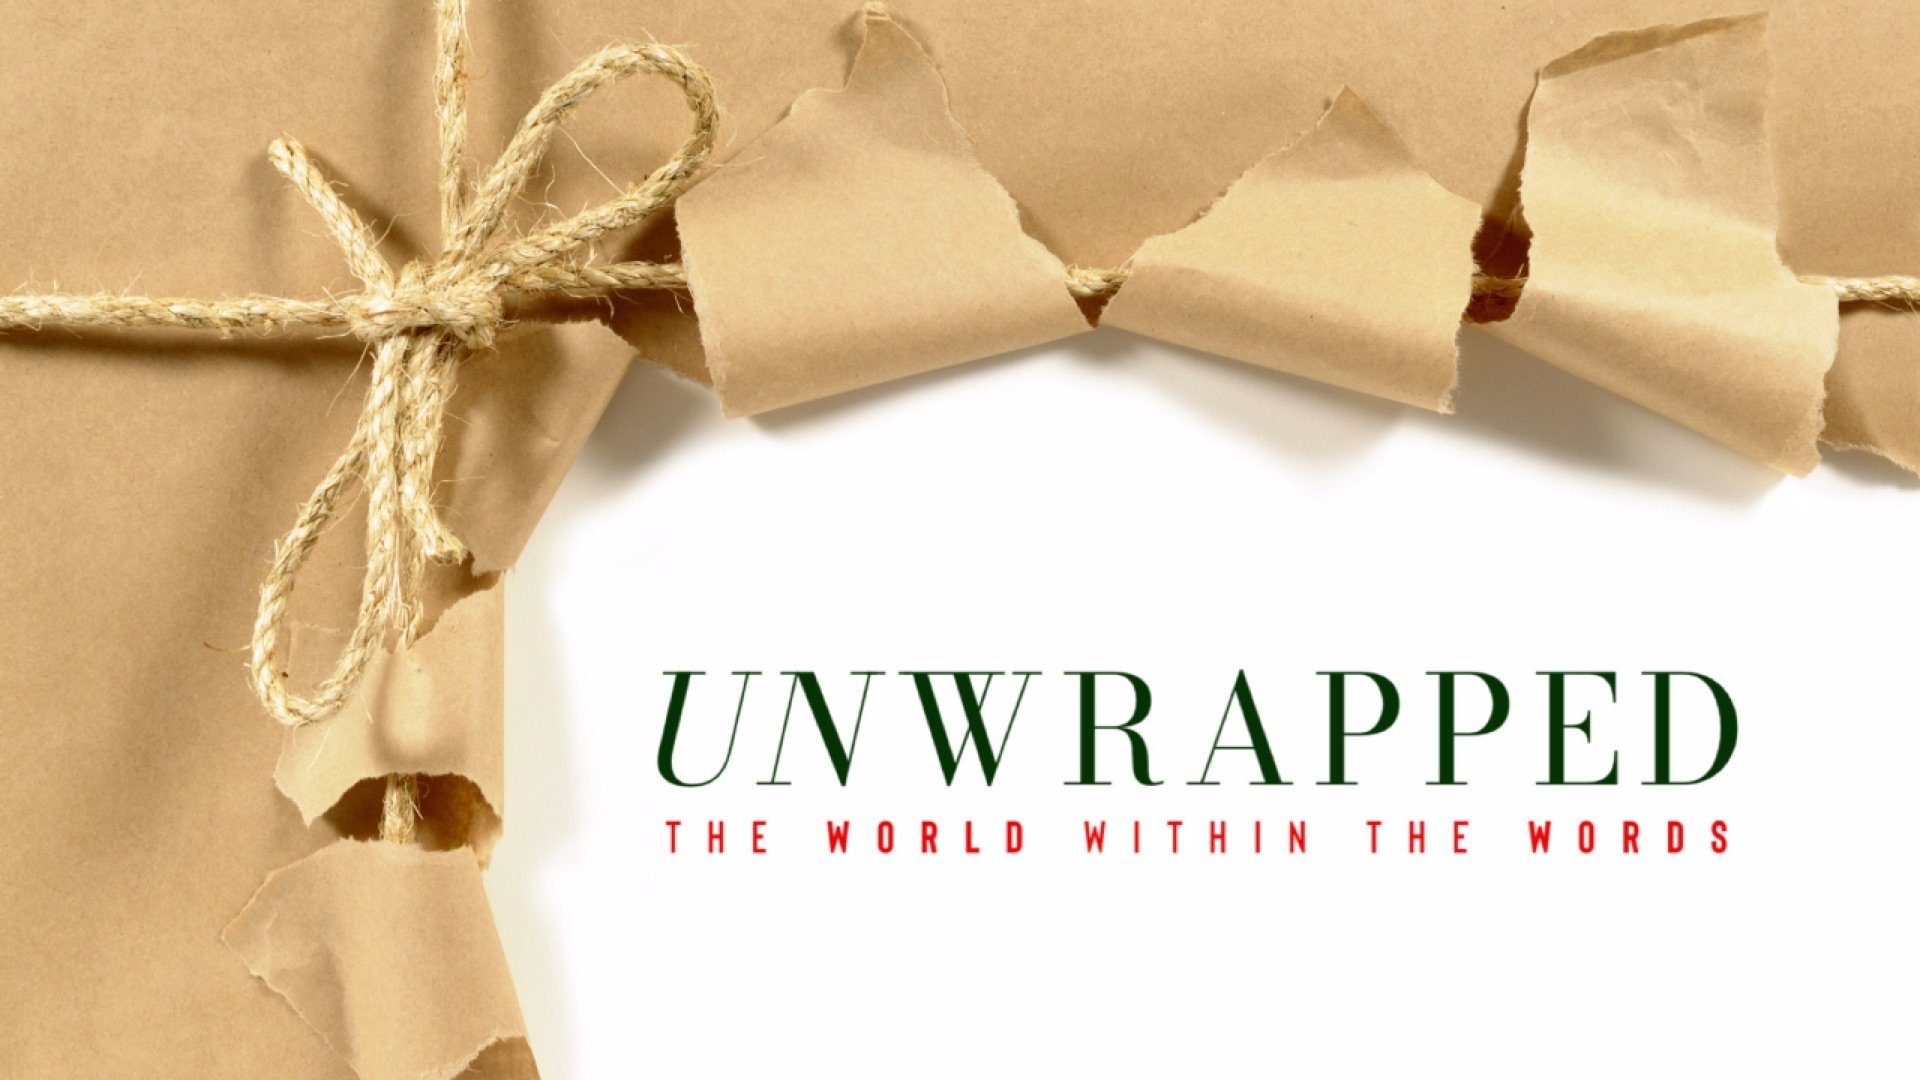 Unwrapped: The World Within the Words